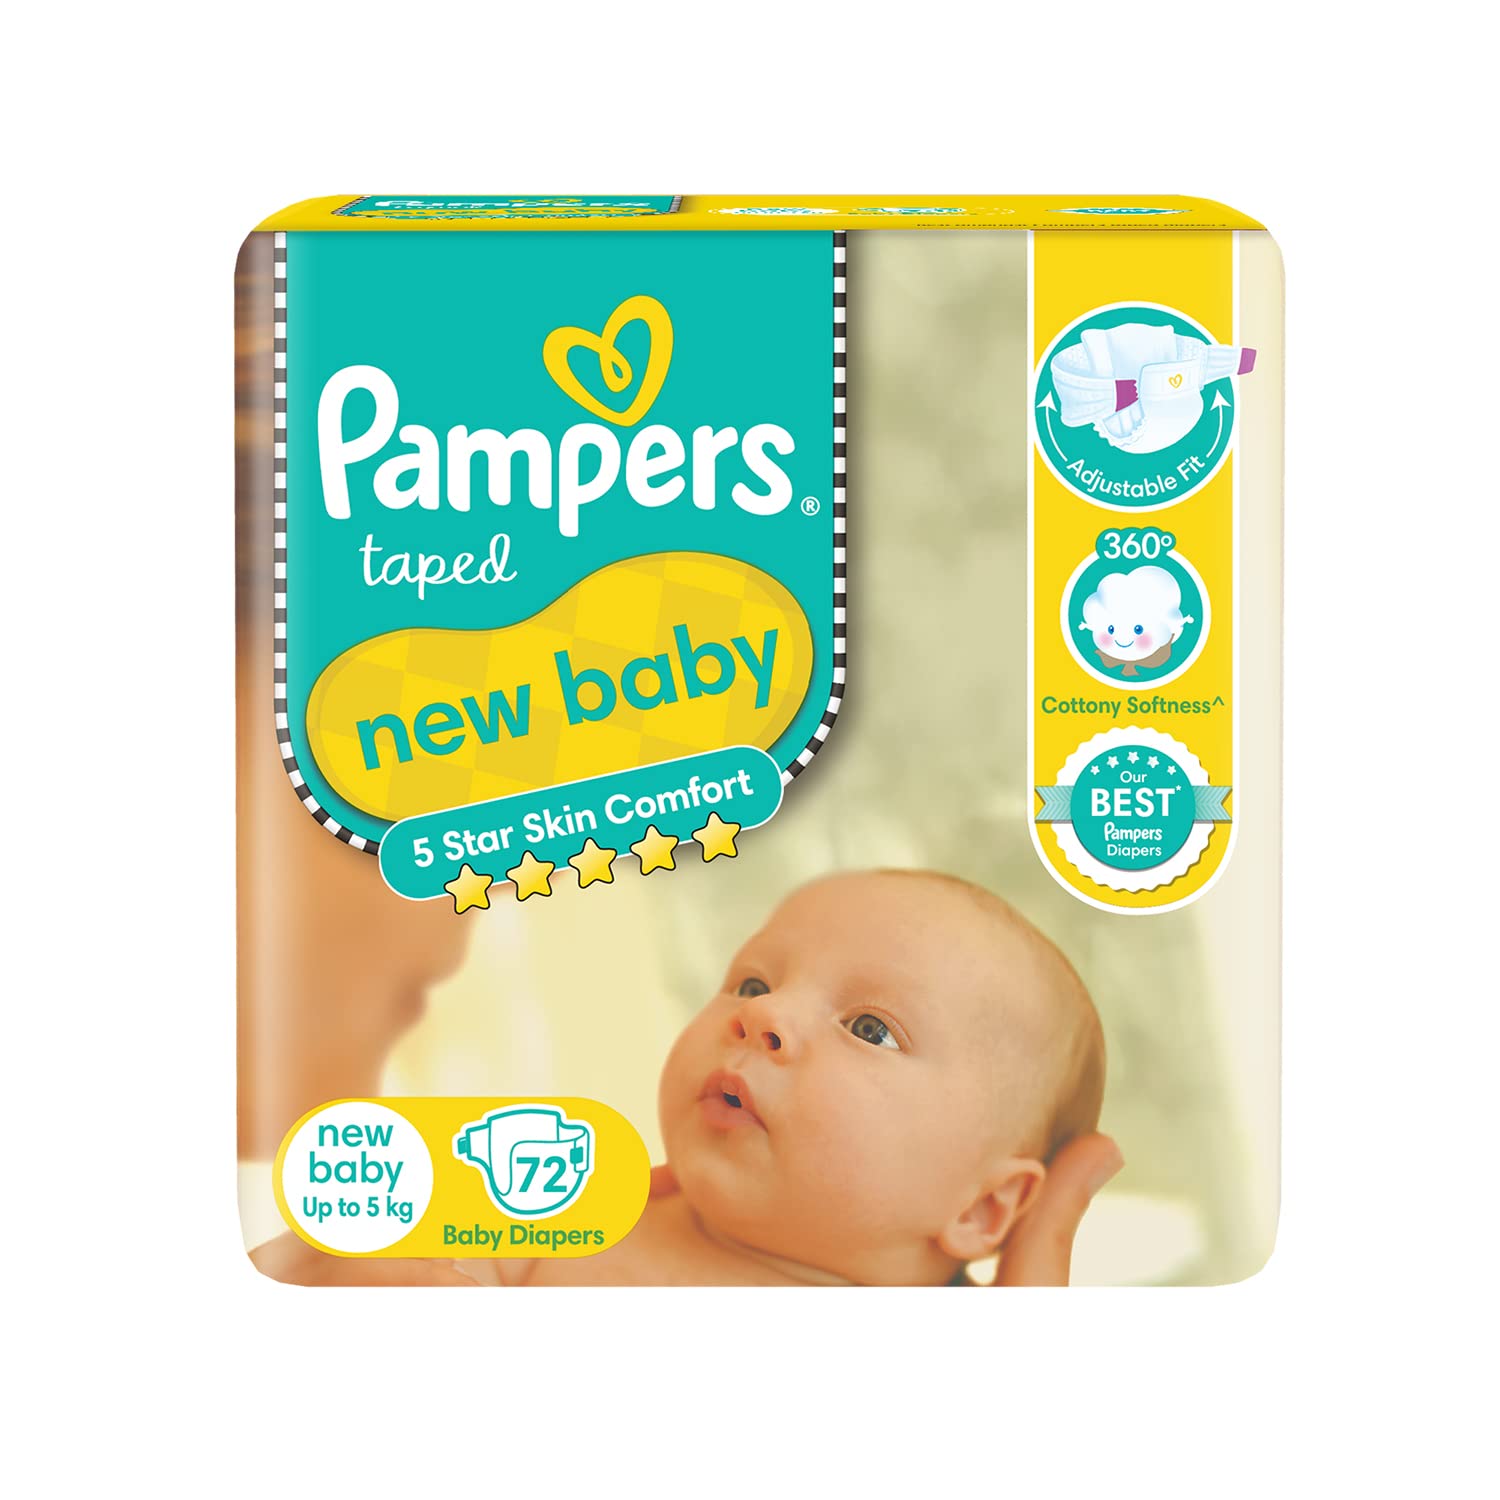 Pampers Taped New Baby Diapers